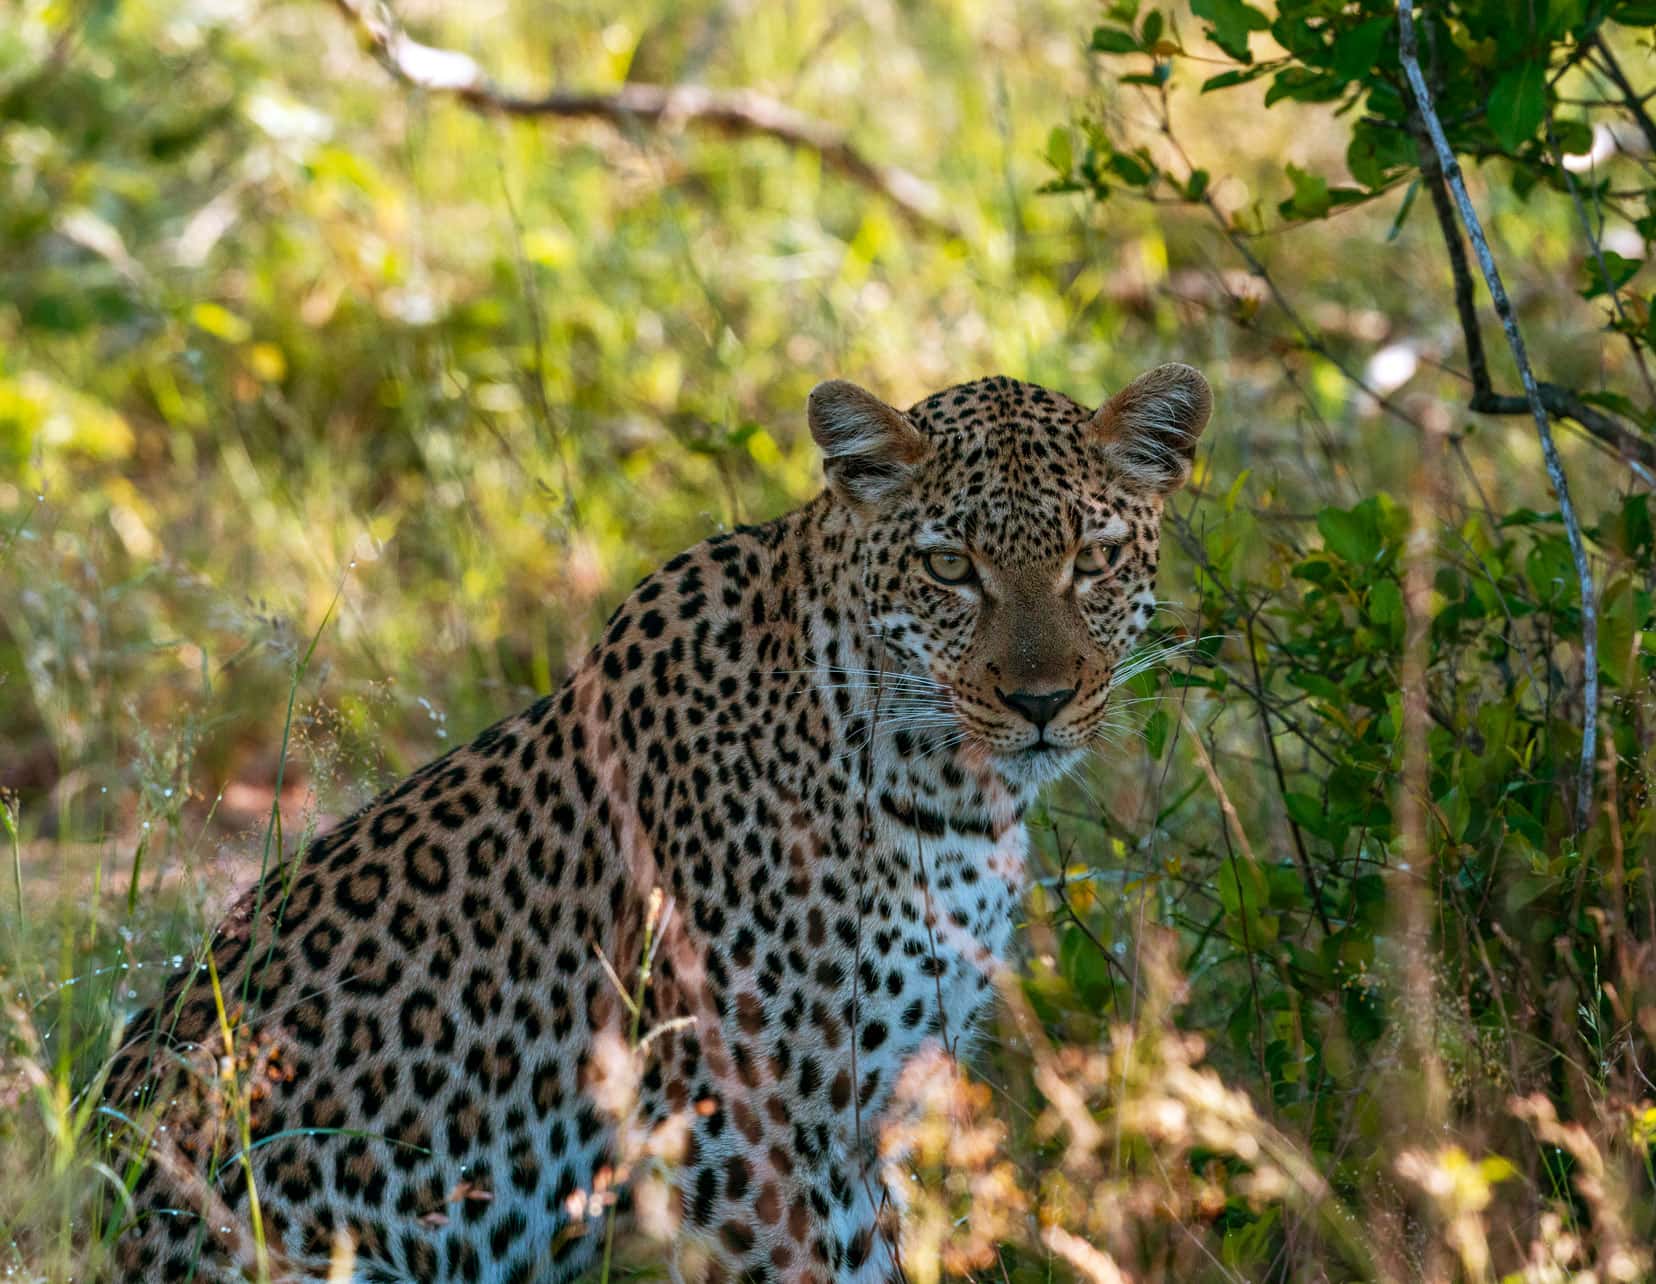 Leopard looking towards the camera